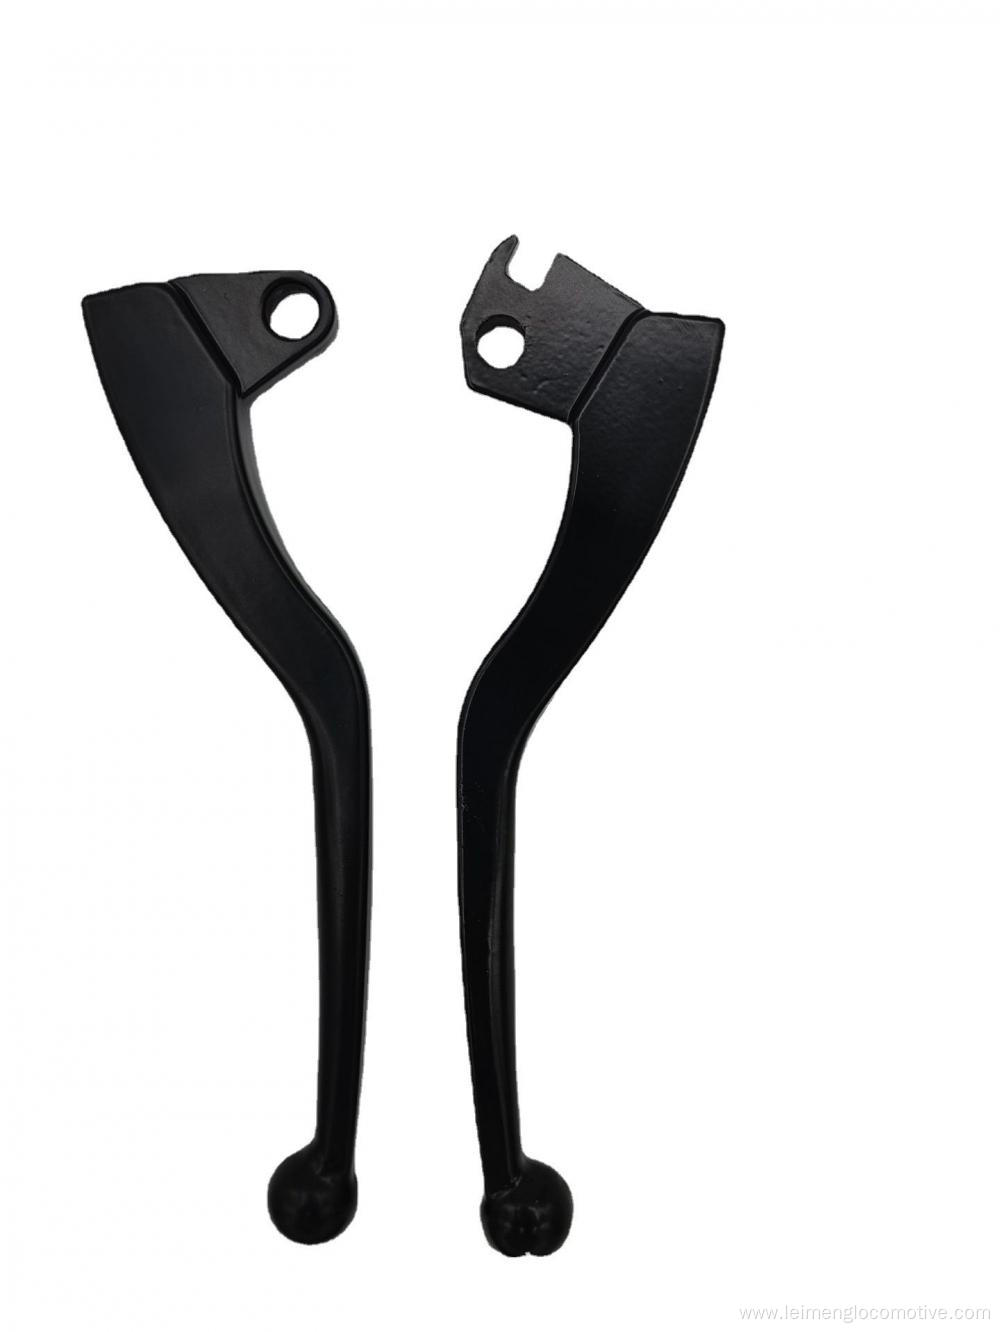 Whole brake handle for motorcycle horn guard